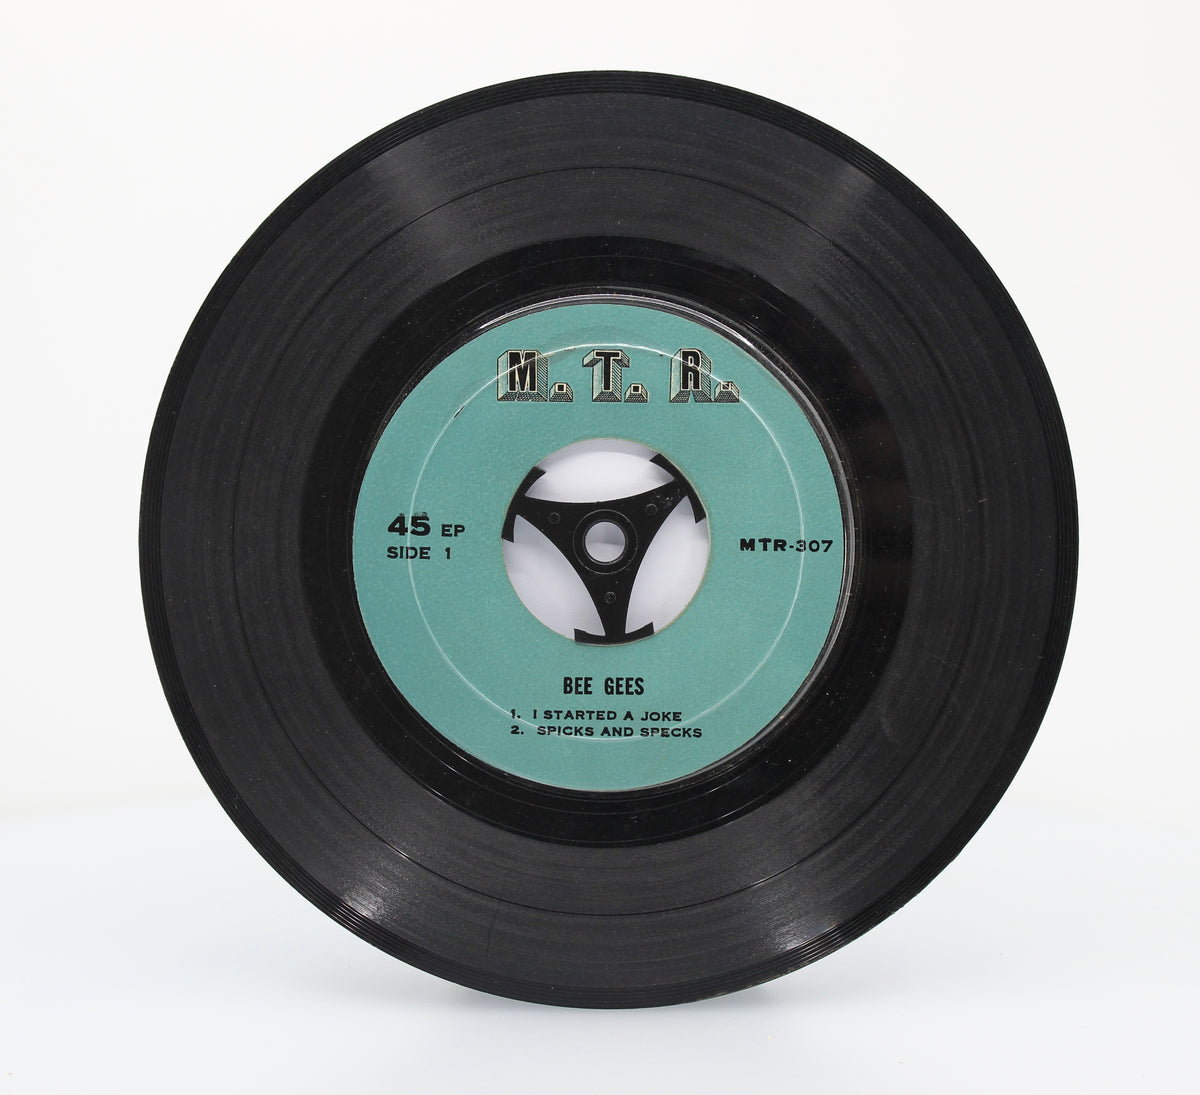 Bee Gees - I Started A Joke, Vinyl EP 45 rpm, Thailand